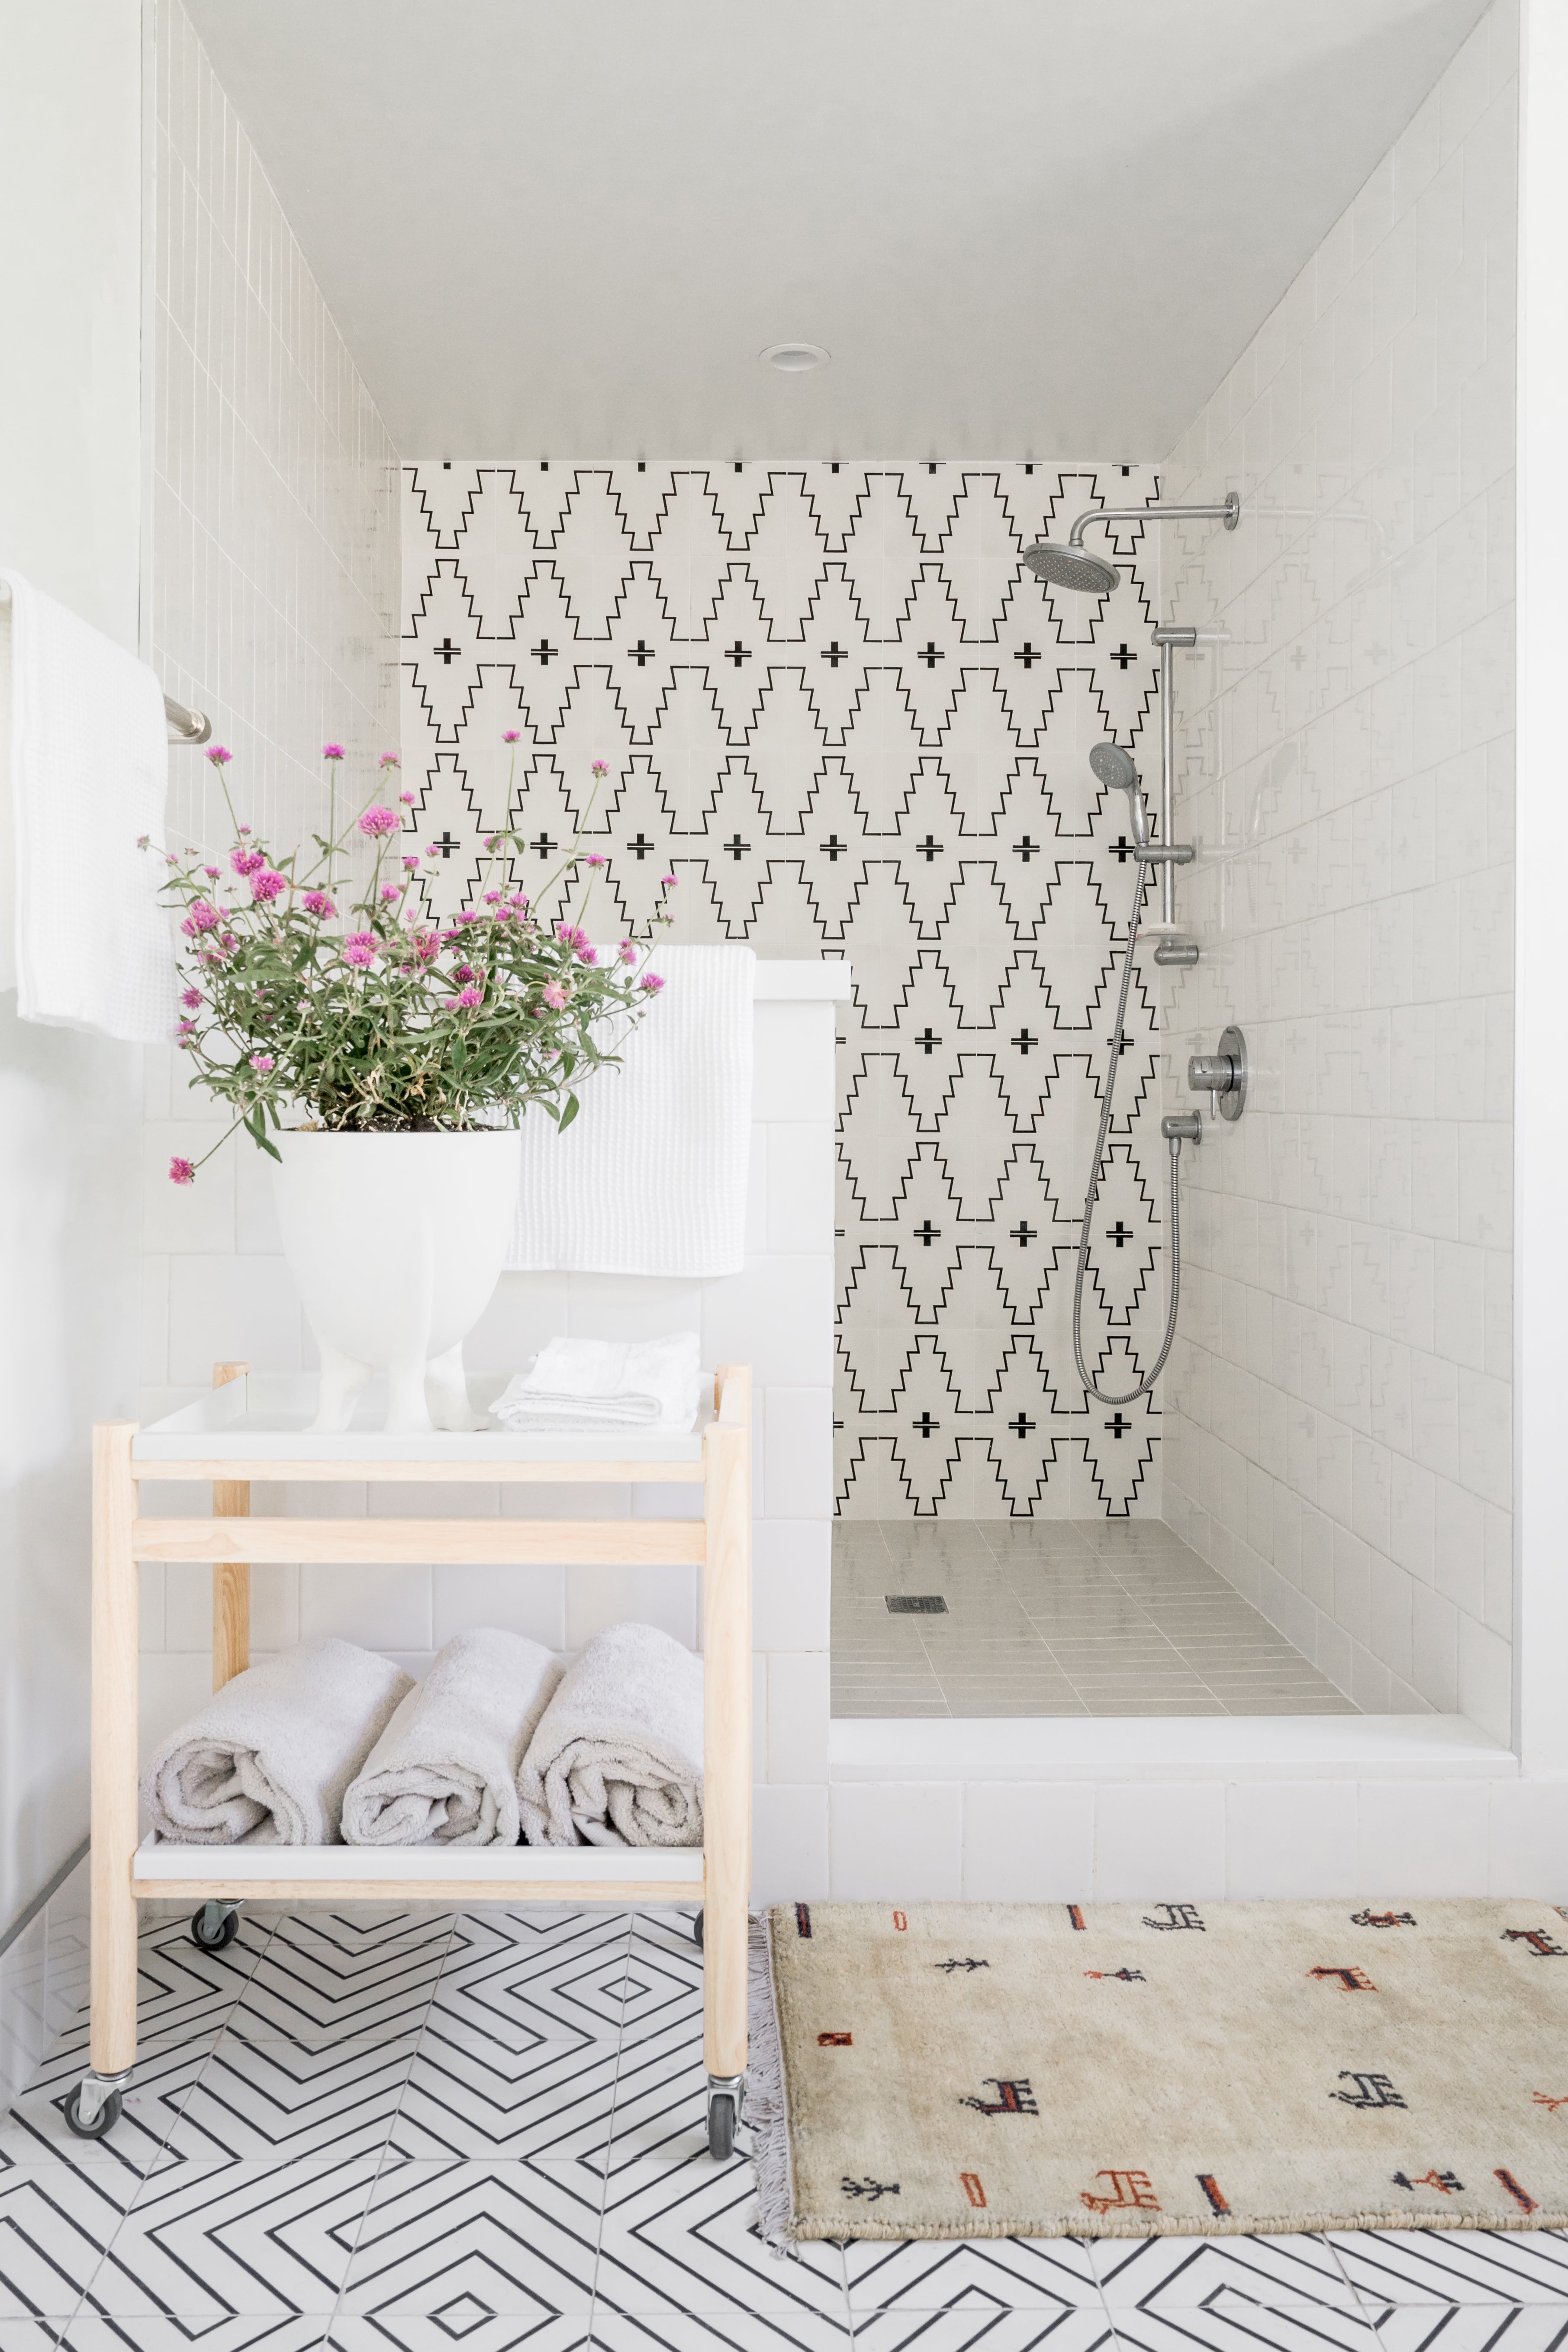 Bathroom with black and white tile